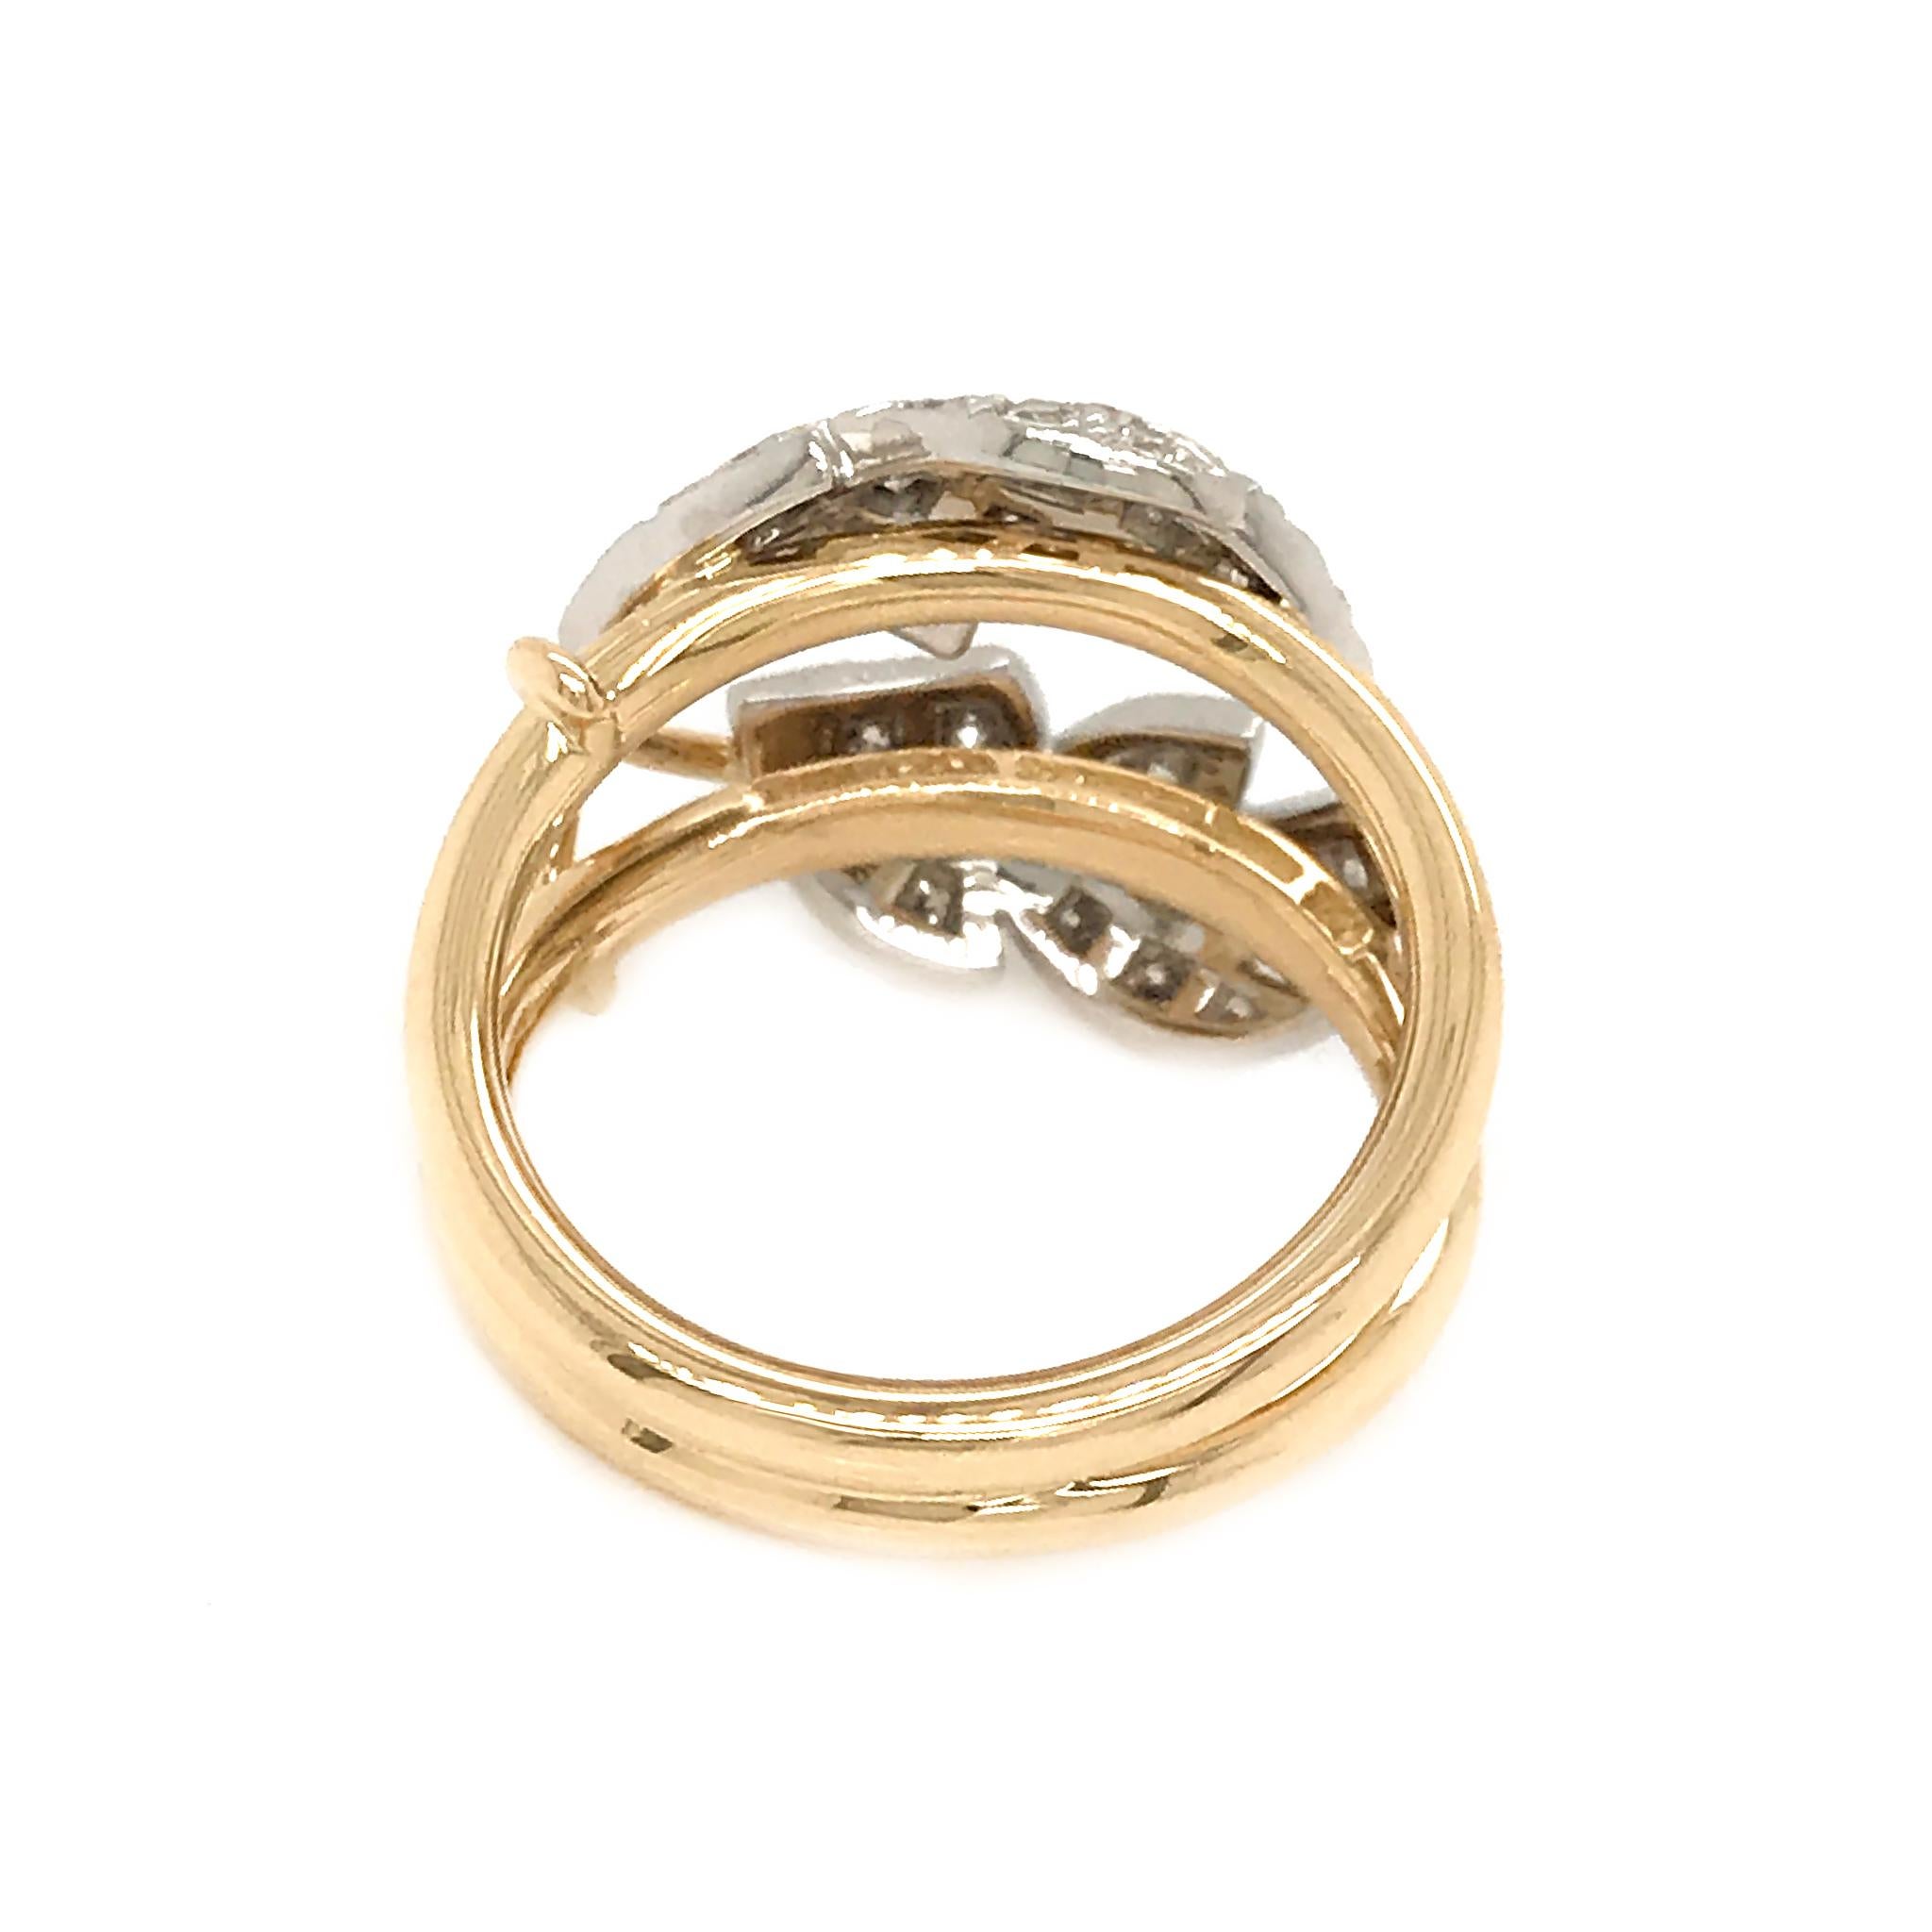 18k Yellow Gold and Platinum
Diamond: 0.54ct twd 
Total Weight: 8.7 grams
Ring Size: 5